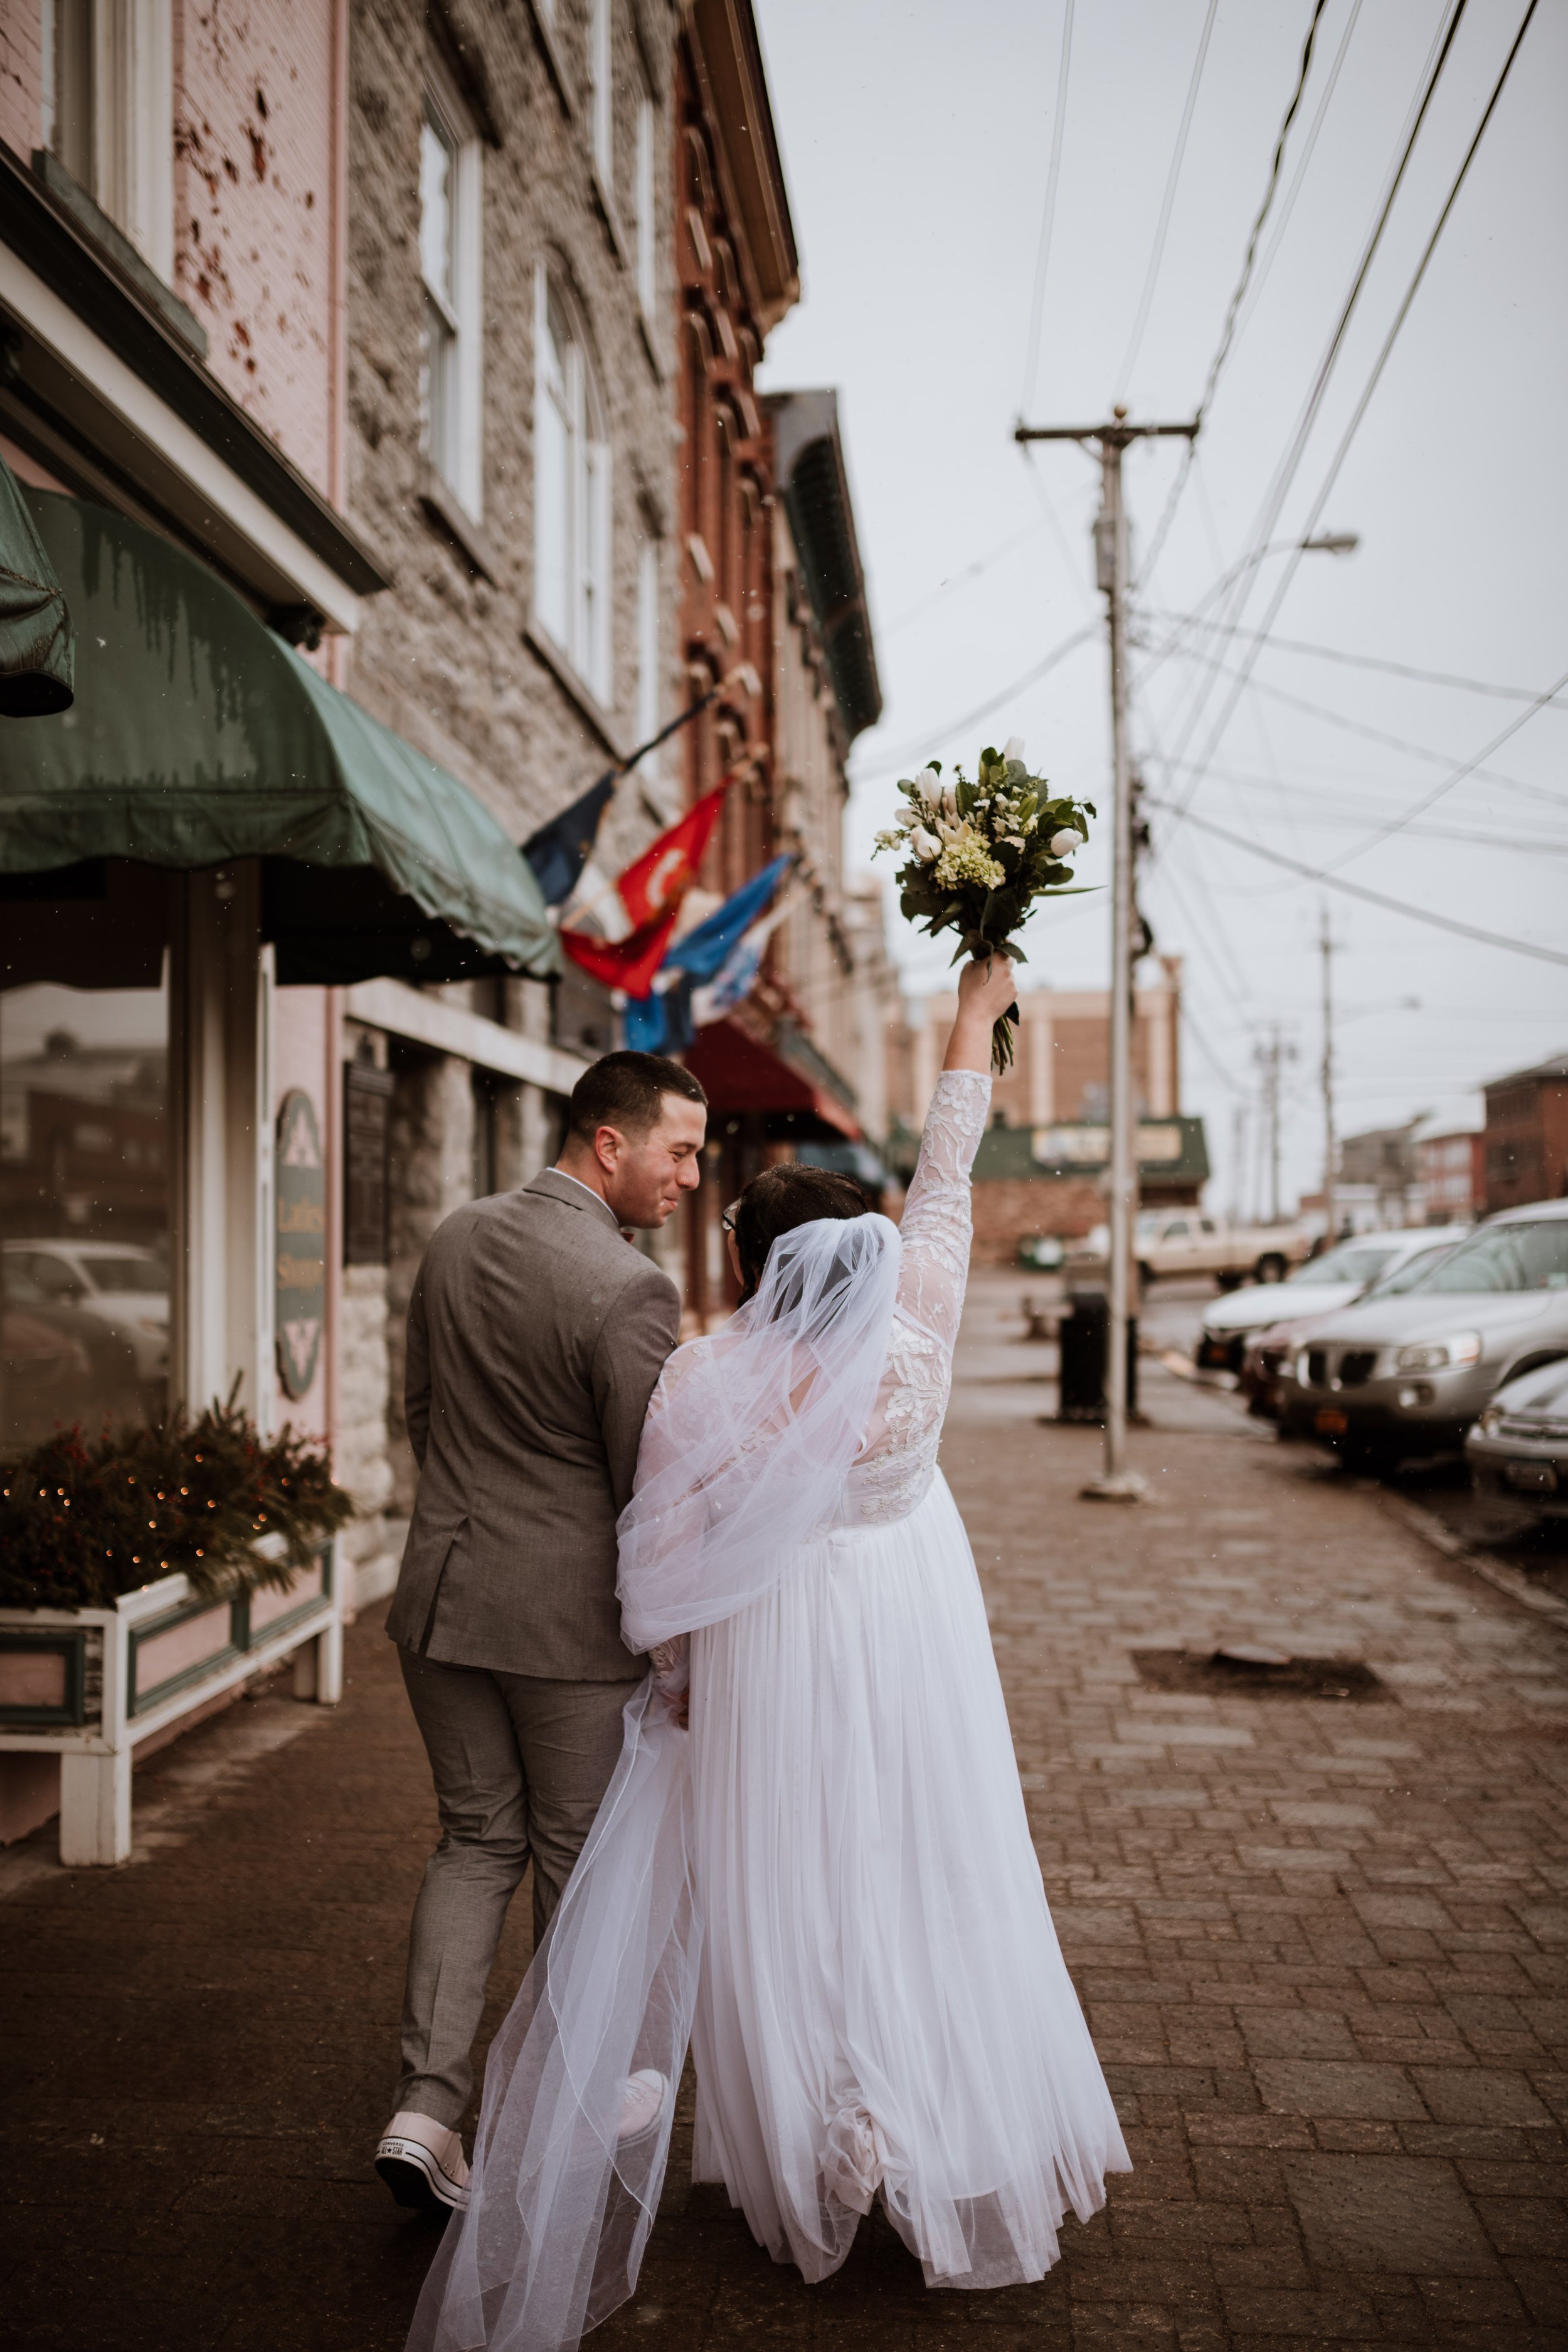 Newlywed couple walking together in downtown Clayton, New York during a light snowfall.